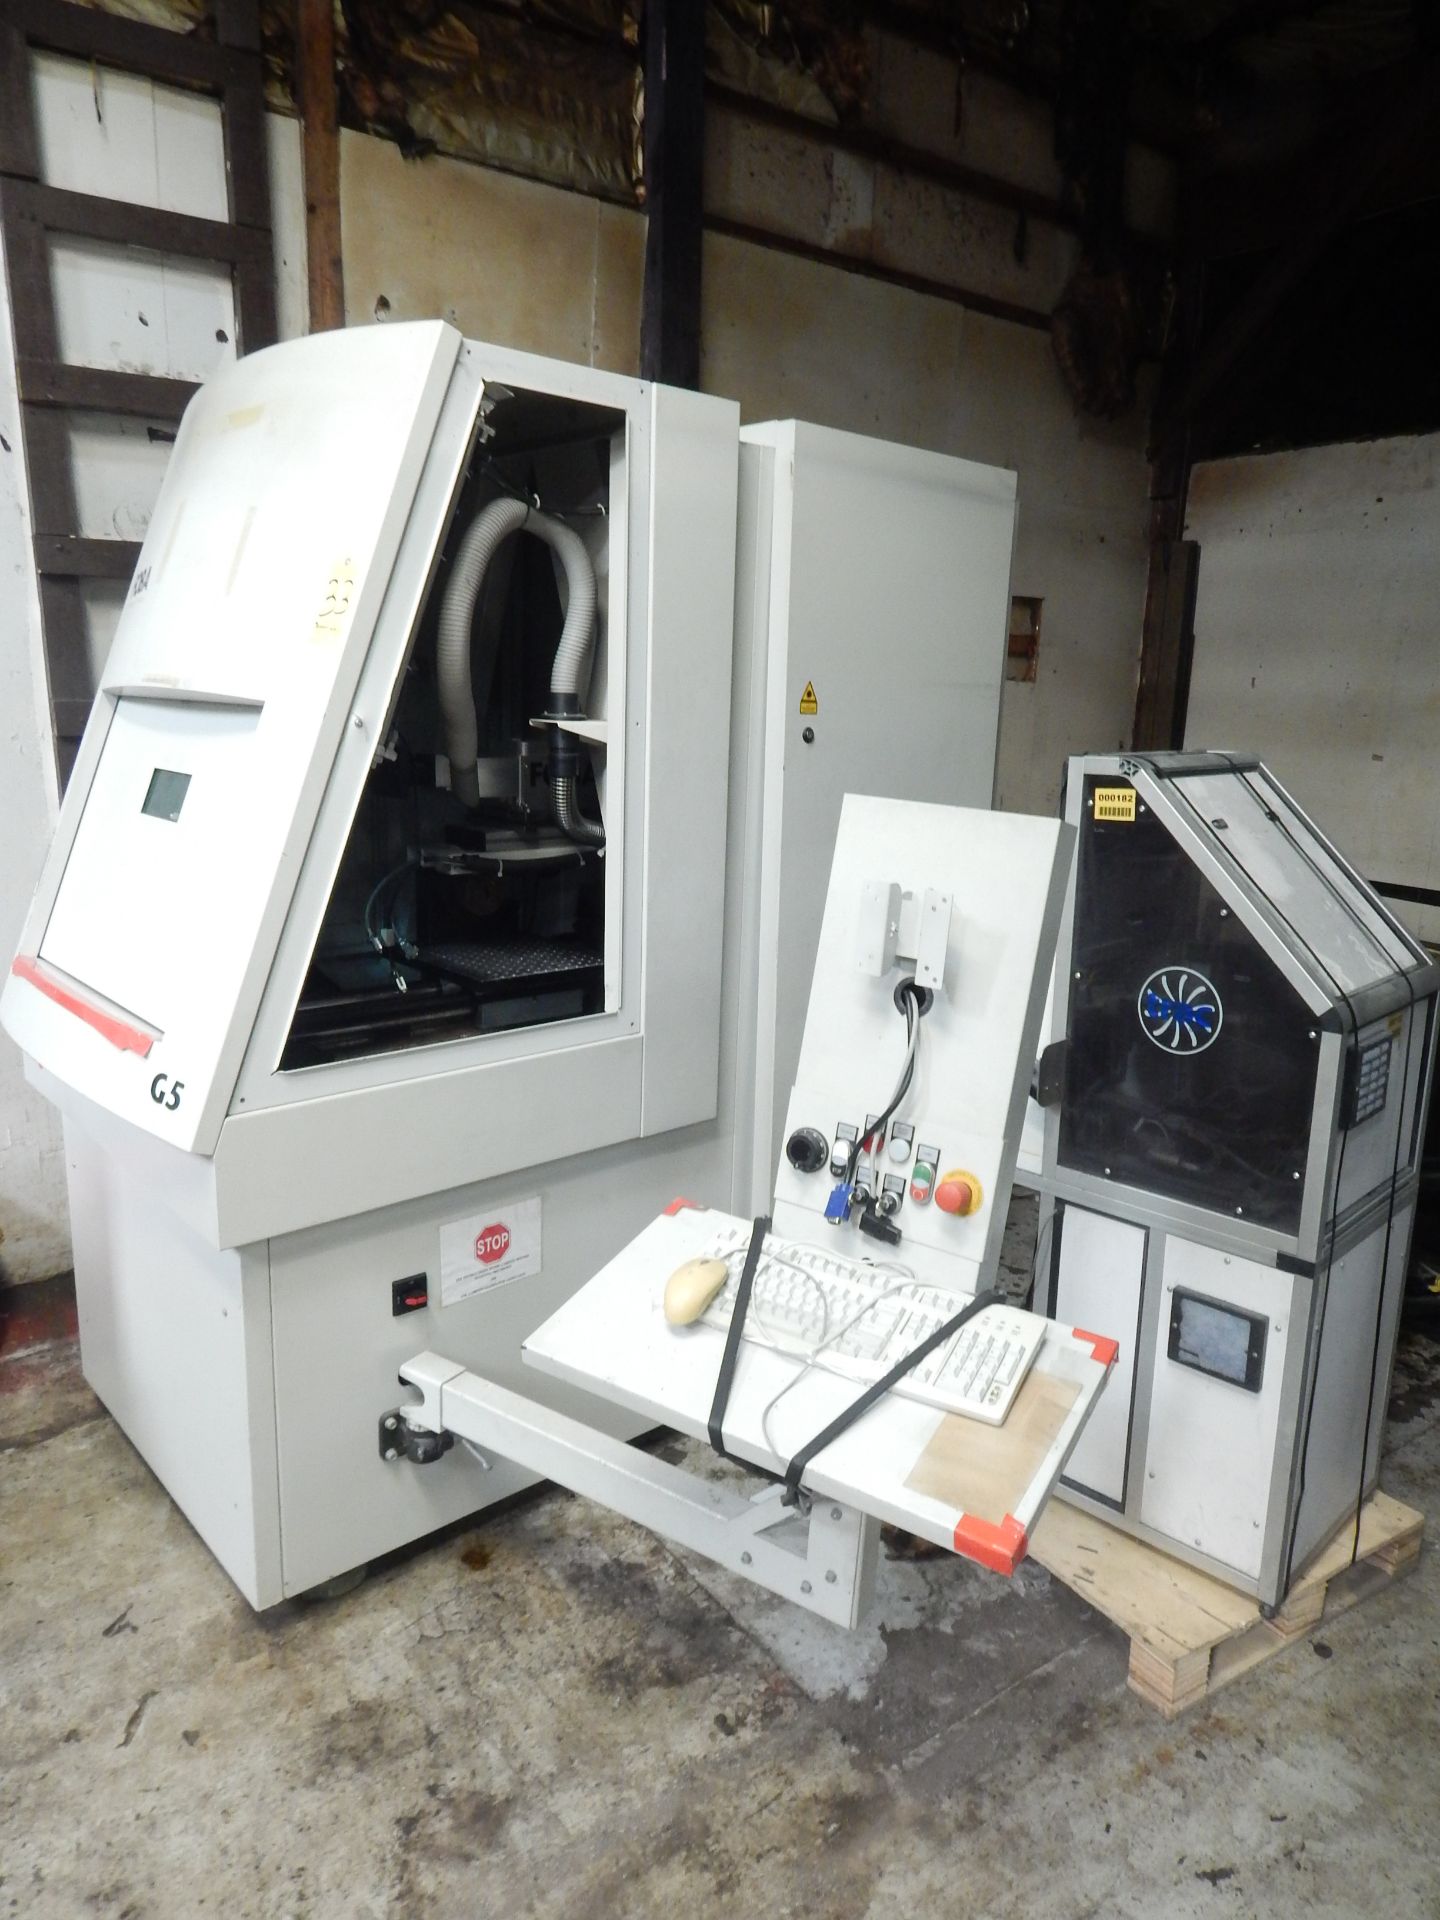 Foba Model G5 CNC Laser Parts Marker, s/n 106520/10000, New 2007, 4th Axis Indexer, 4.72" X 4.72" - Image 7 of 13